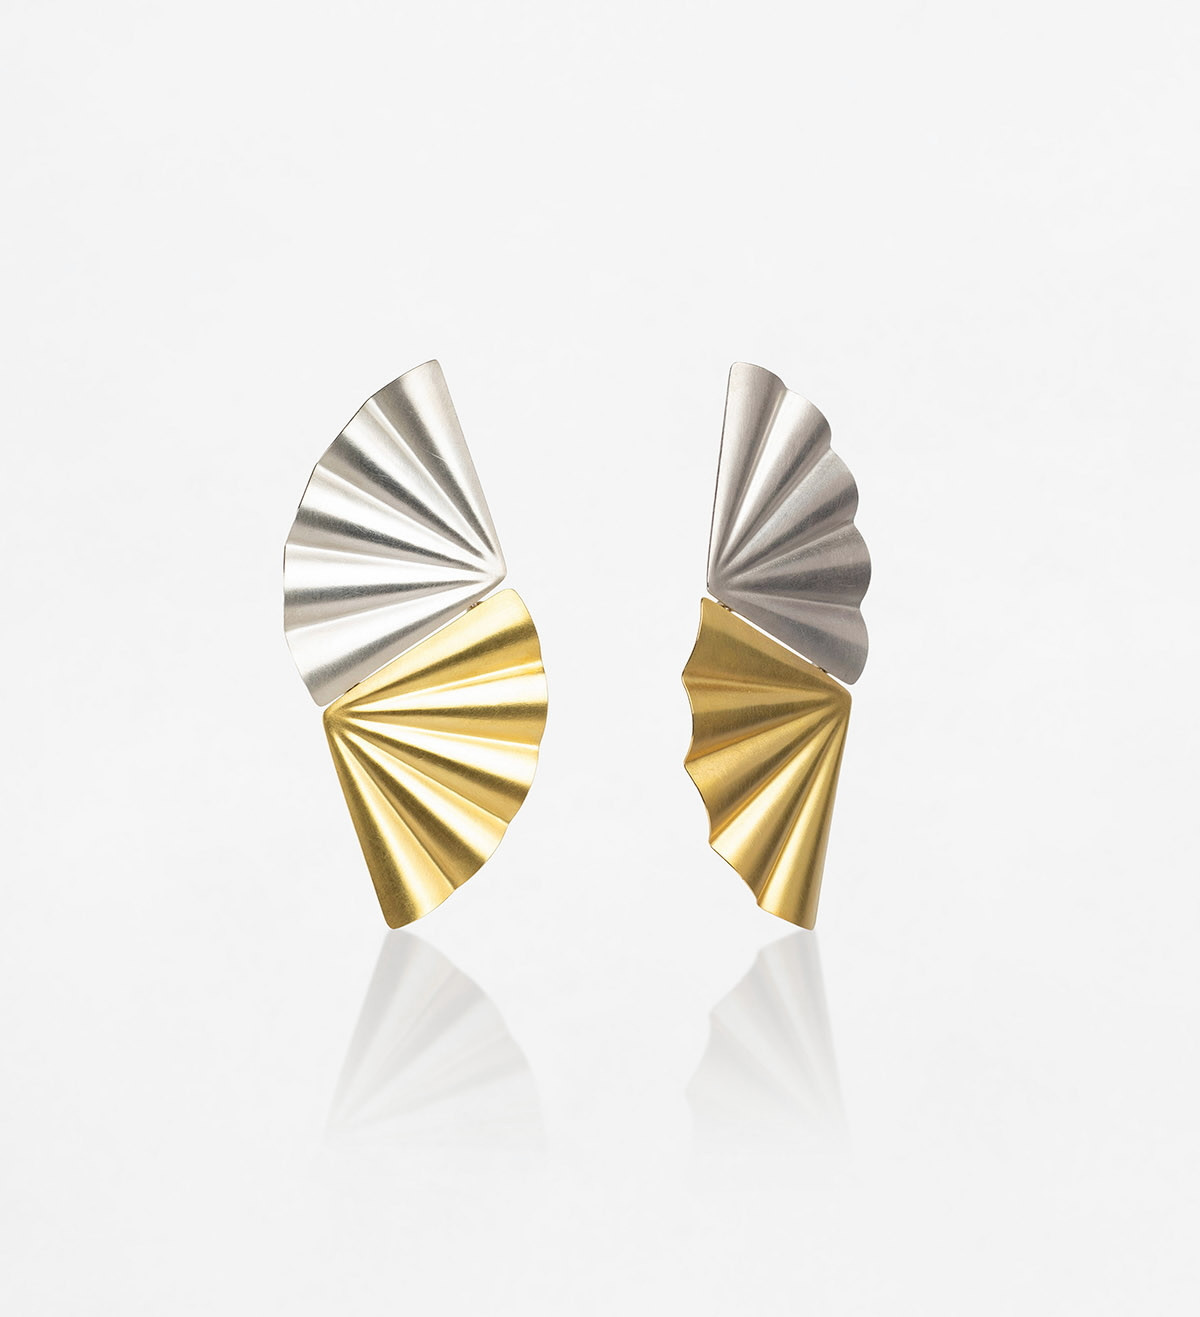 18k gold and silver earrings Maiko 67mm